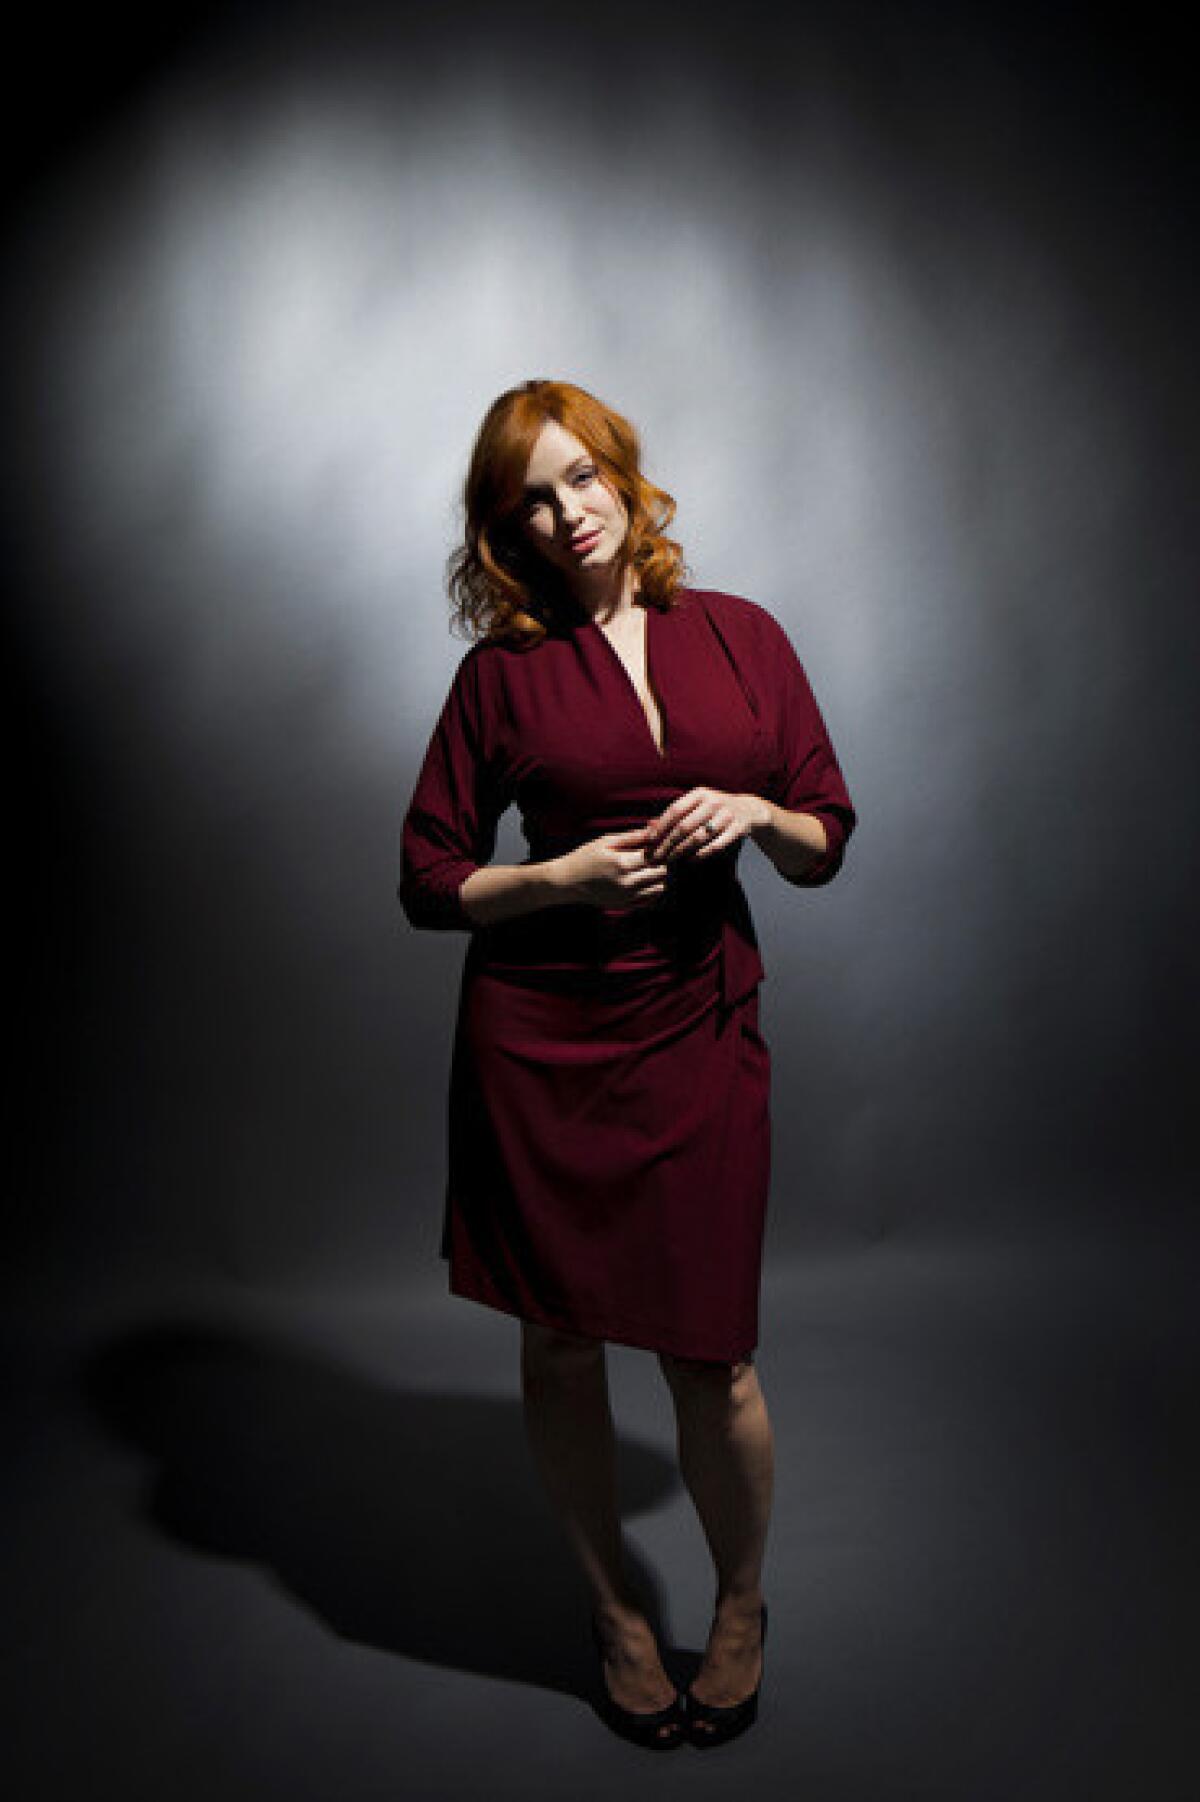 Emmy-nominated actress Christina Hendricks' role has changed since the inception of "Mad Men."